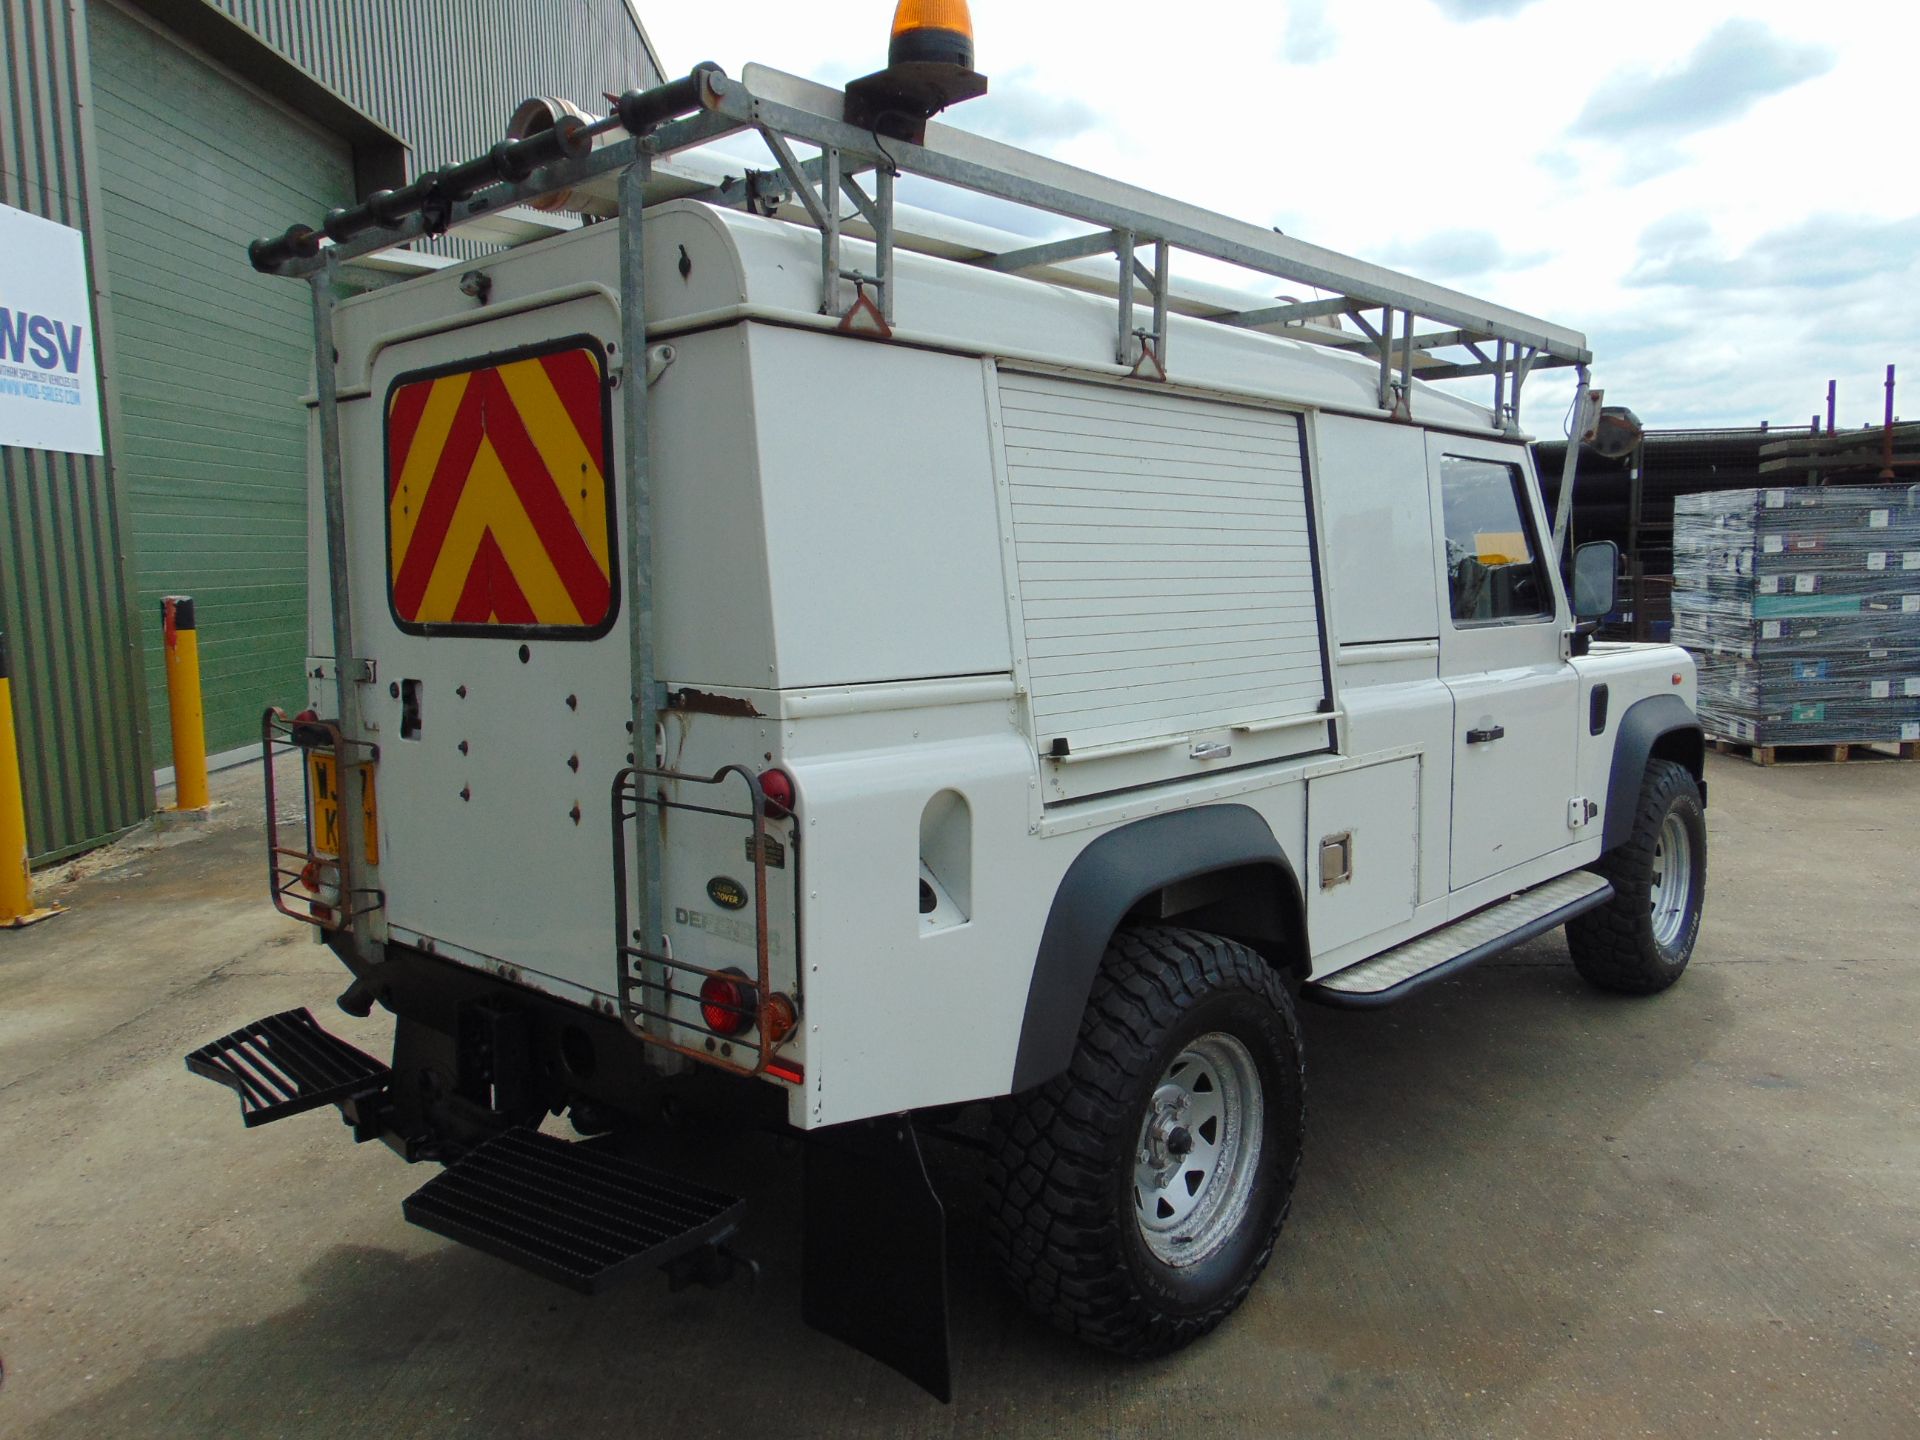 2007 Land Rover Defender 110 Puma hardtop 4x4 Utility vehicle (mobile workshop) with hydraulic winch - Image 7 of 31